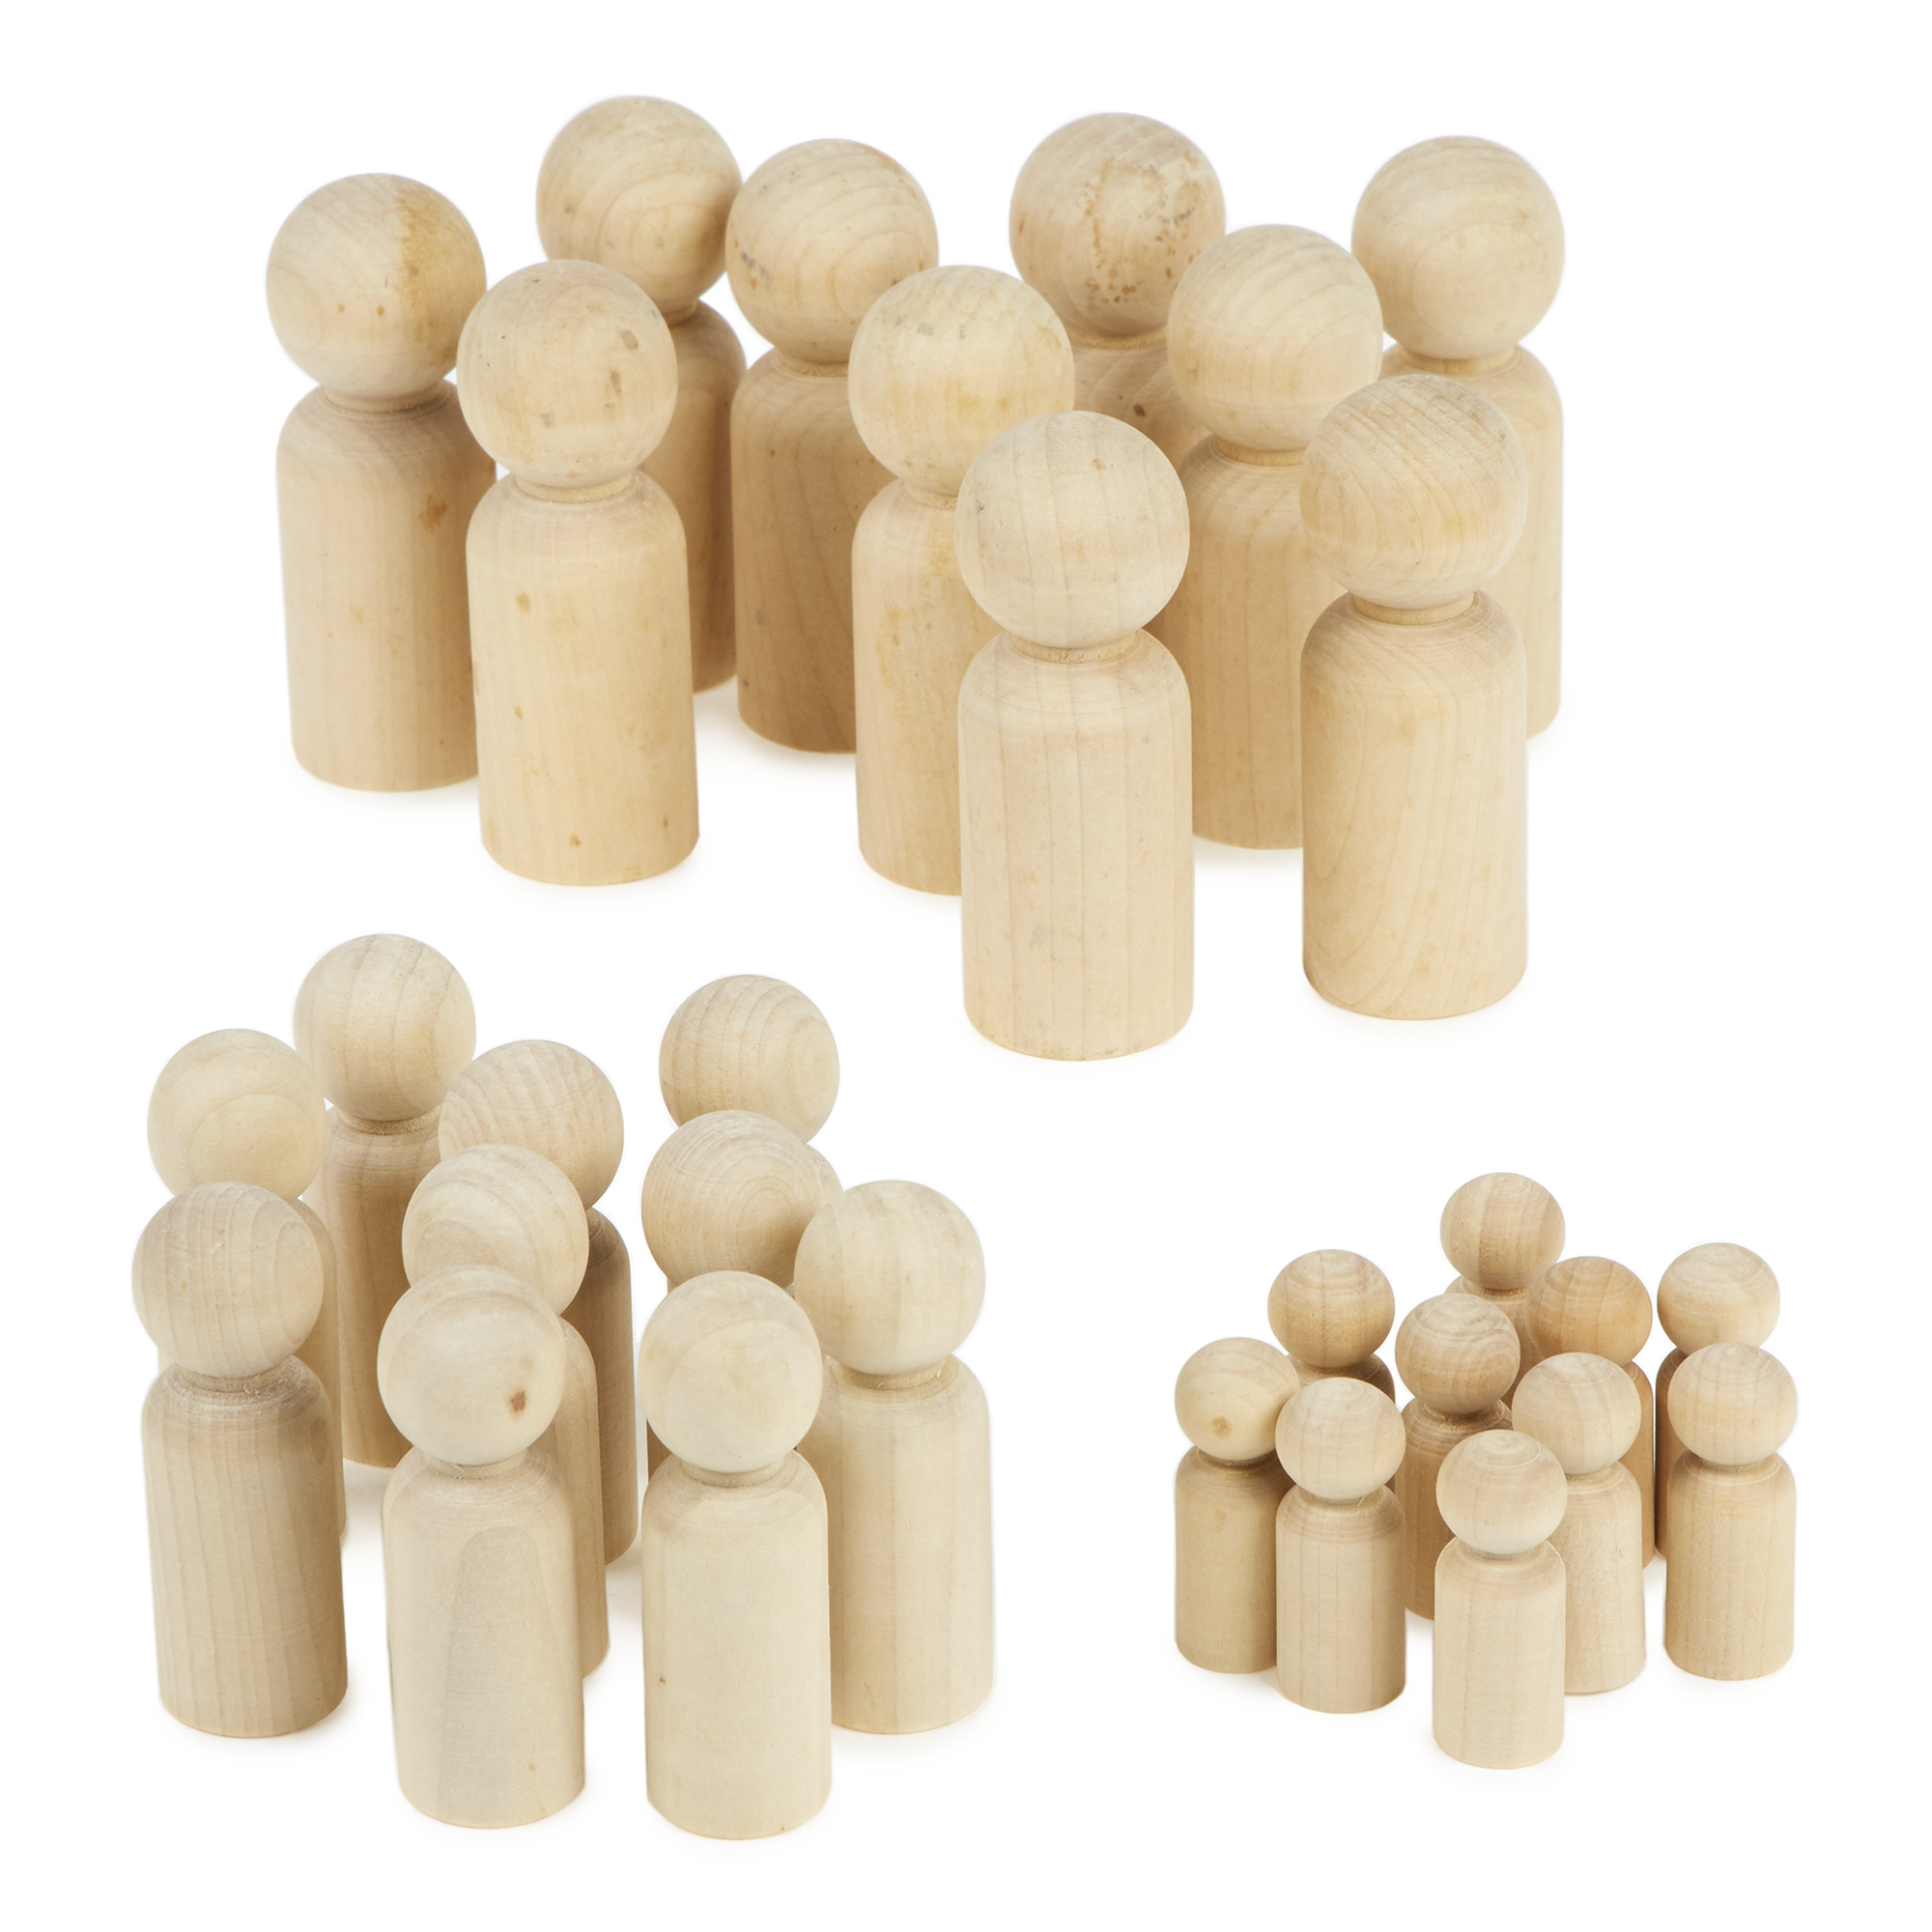 Wooden People Special Offer